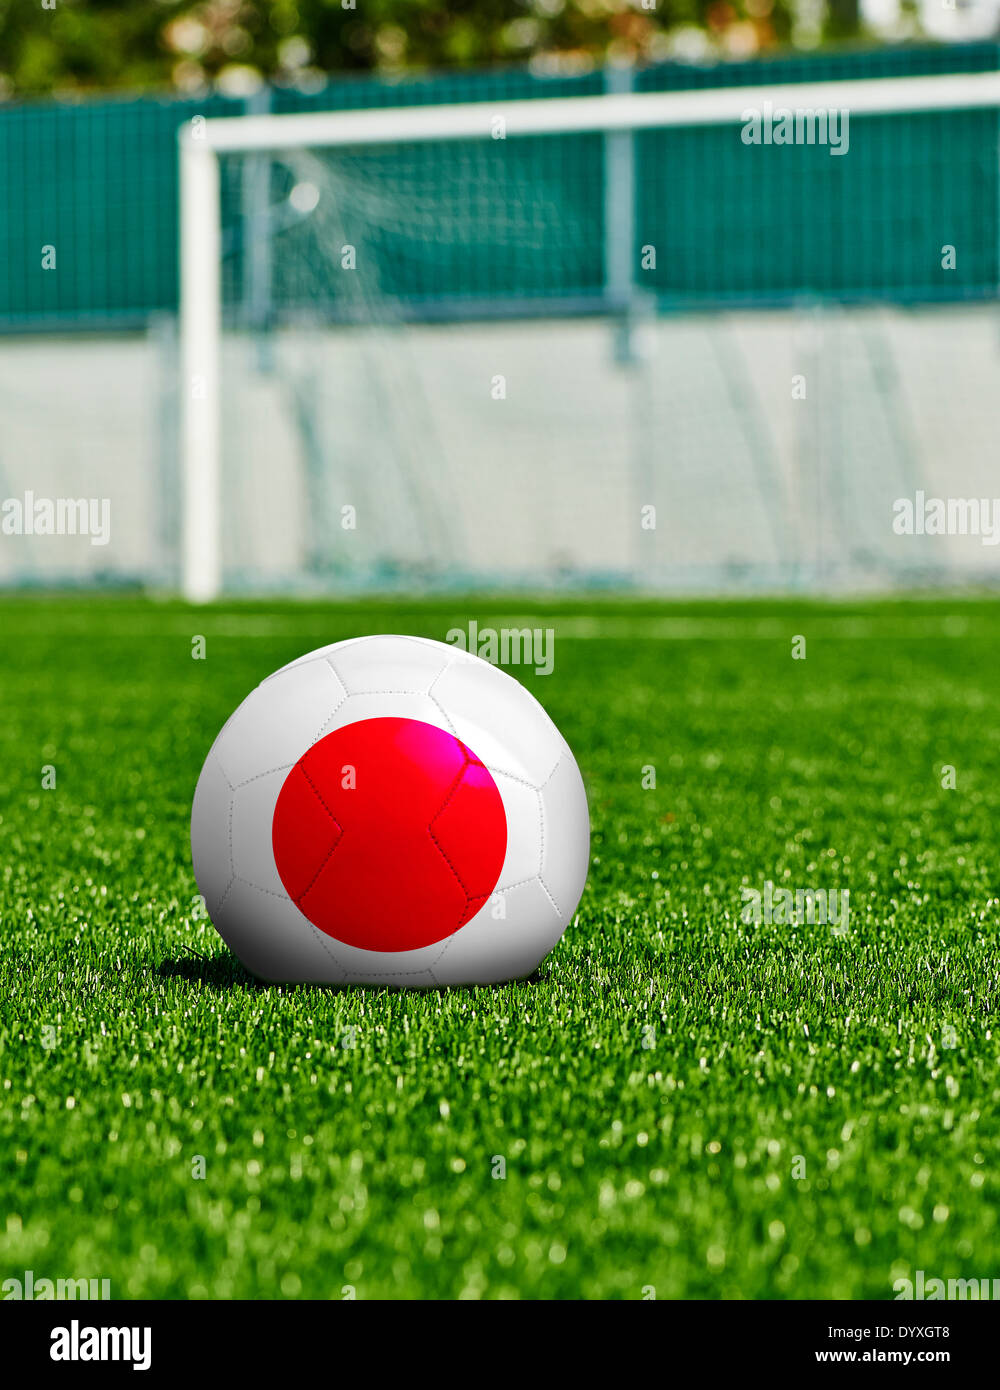 Soccer Ball with Japan Flag on the grass in stadium Stock Photo